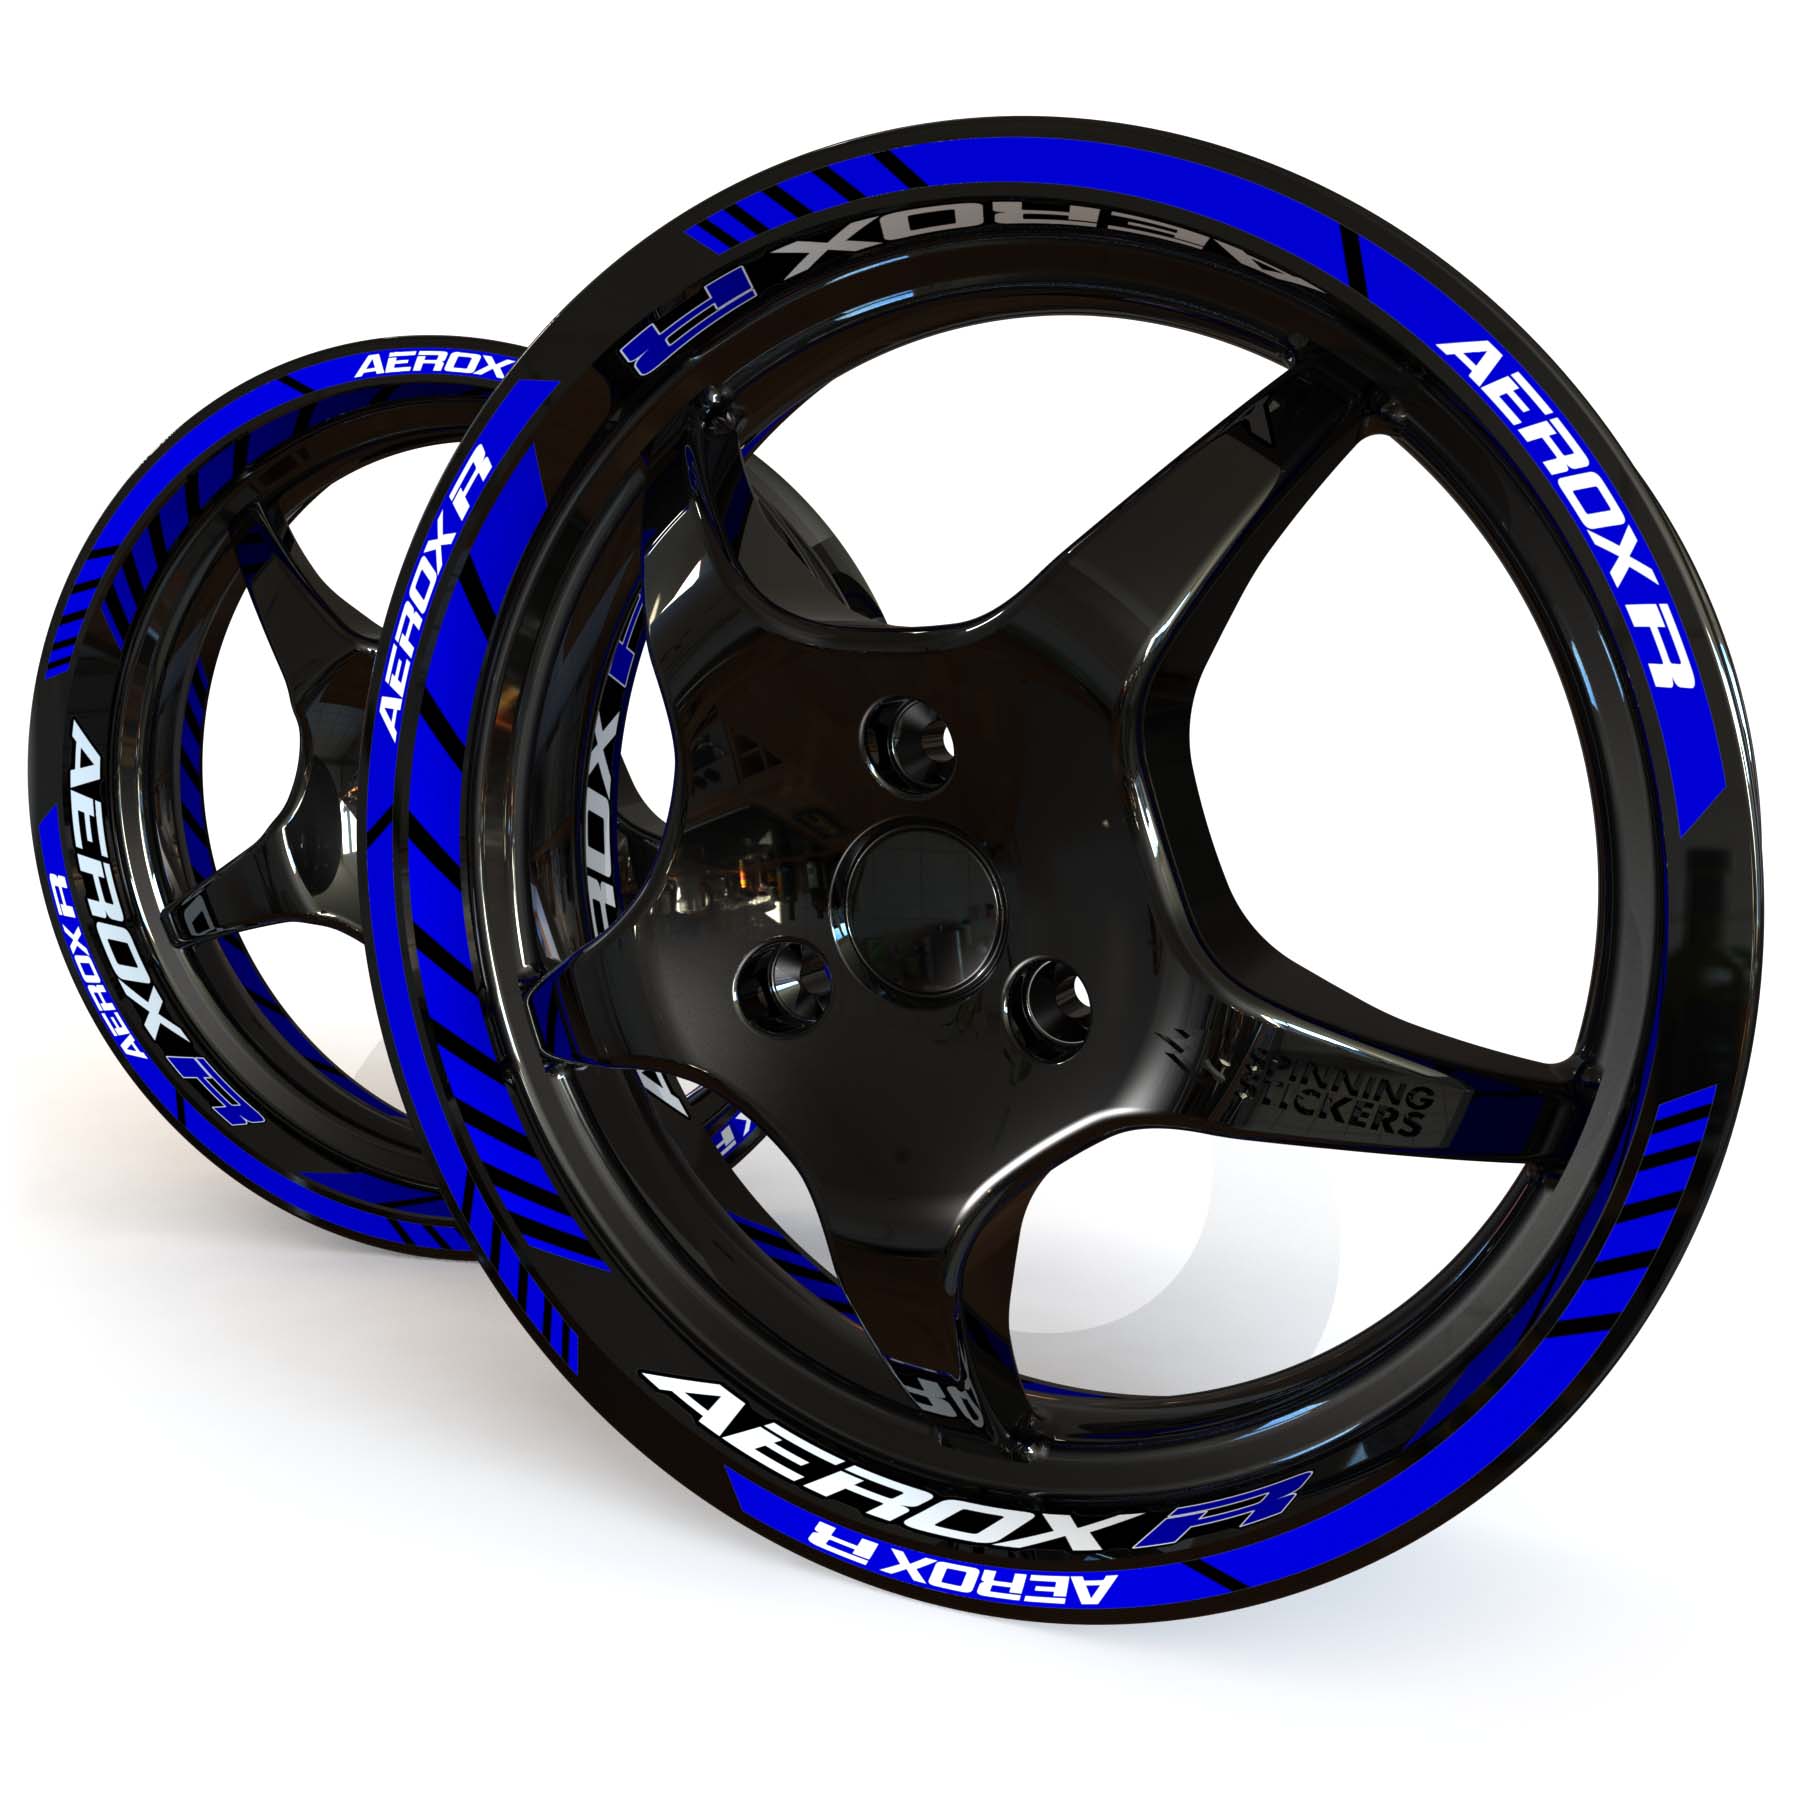 Blue and white Yamaha Aerox R wheel stickers on a black 12 inch moped rim